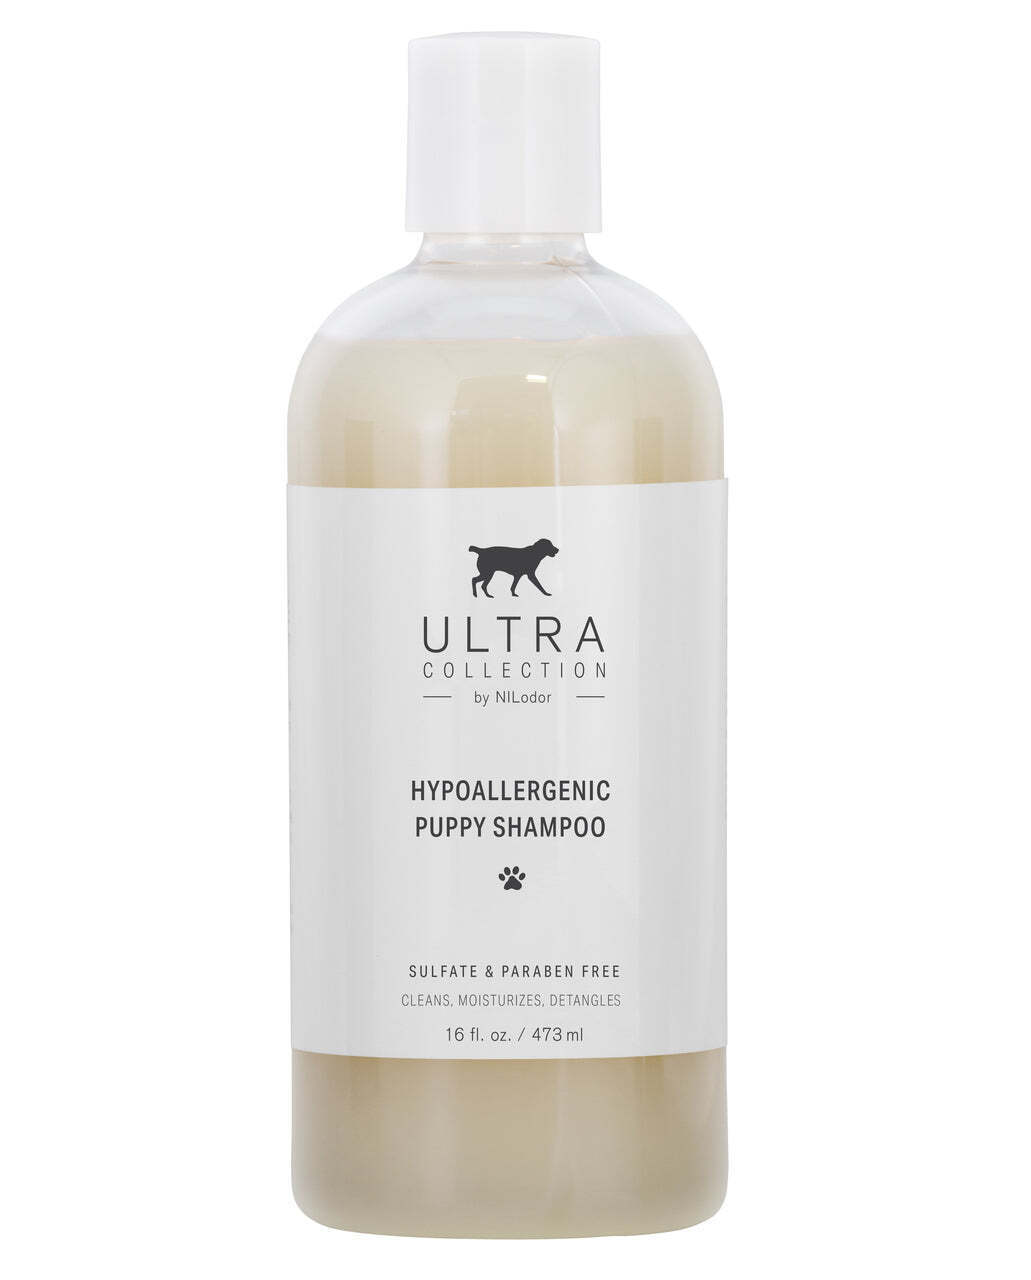 Primary image for Gentle Hypoallergenic Puppy Shampoo from Nilodor Ultra Collection